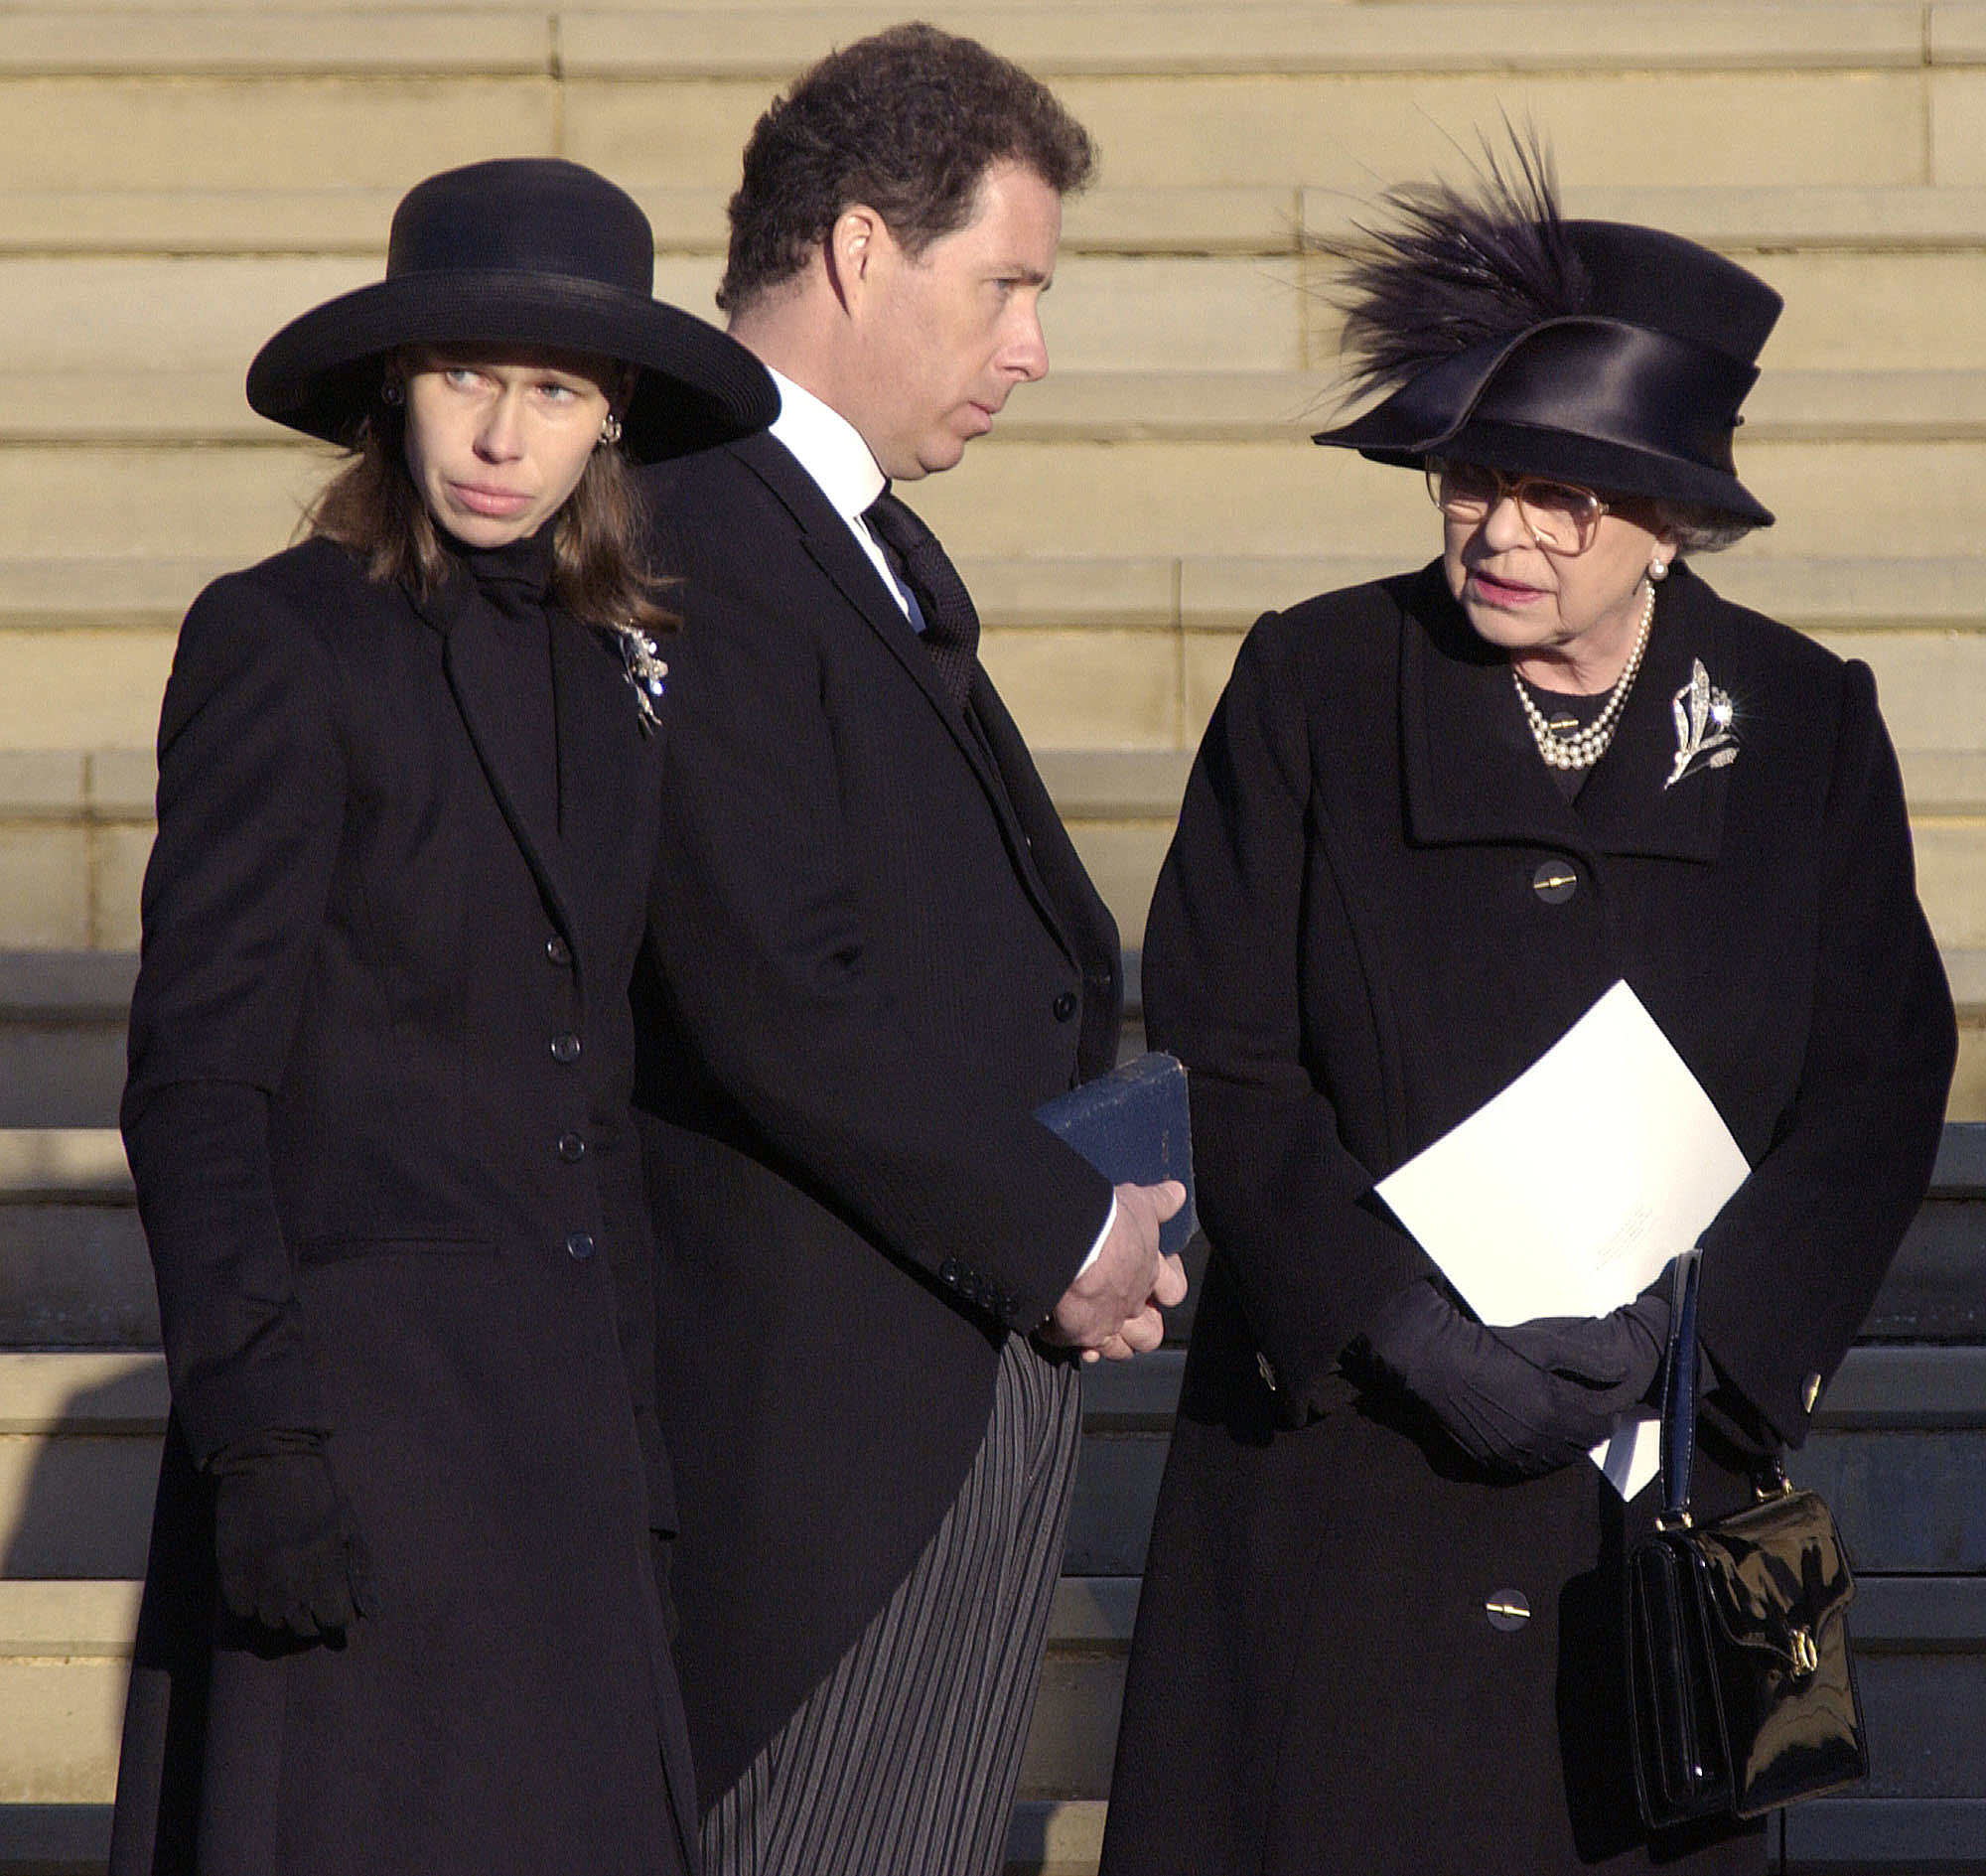 <p>Princess Margaret's children -- Lady Sarah Chatto and David Armstrong-Jones, then known as Viscount Linley (now 2nd Earl of Snowdon) -- were photographed with their aunt, Queen Elizabeth II, on the steps of St. George's Chapel at Windsor Castle following their mother's funeral service on Feb. 15, 2002. </p>